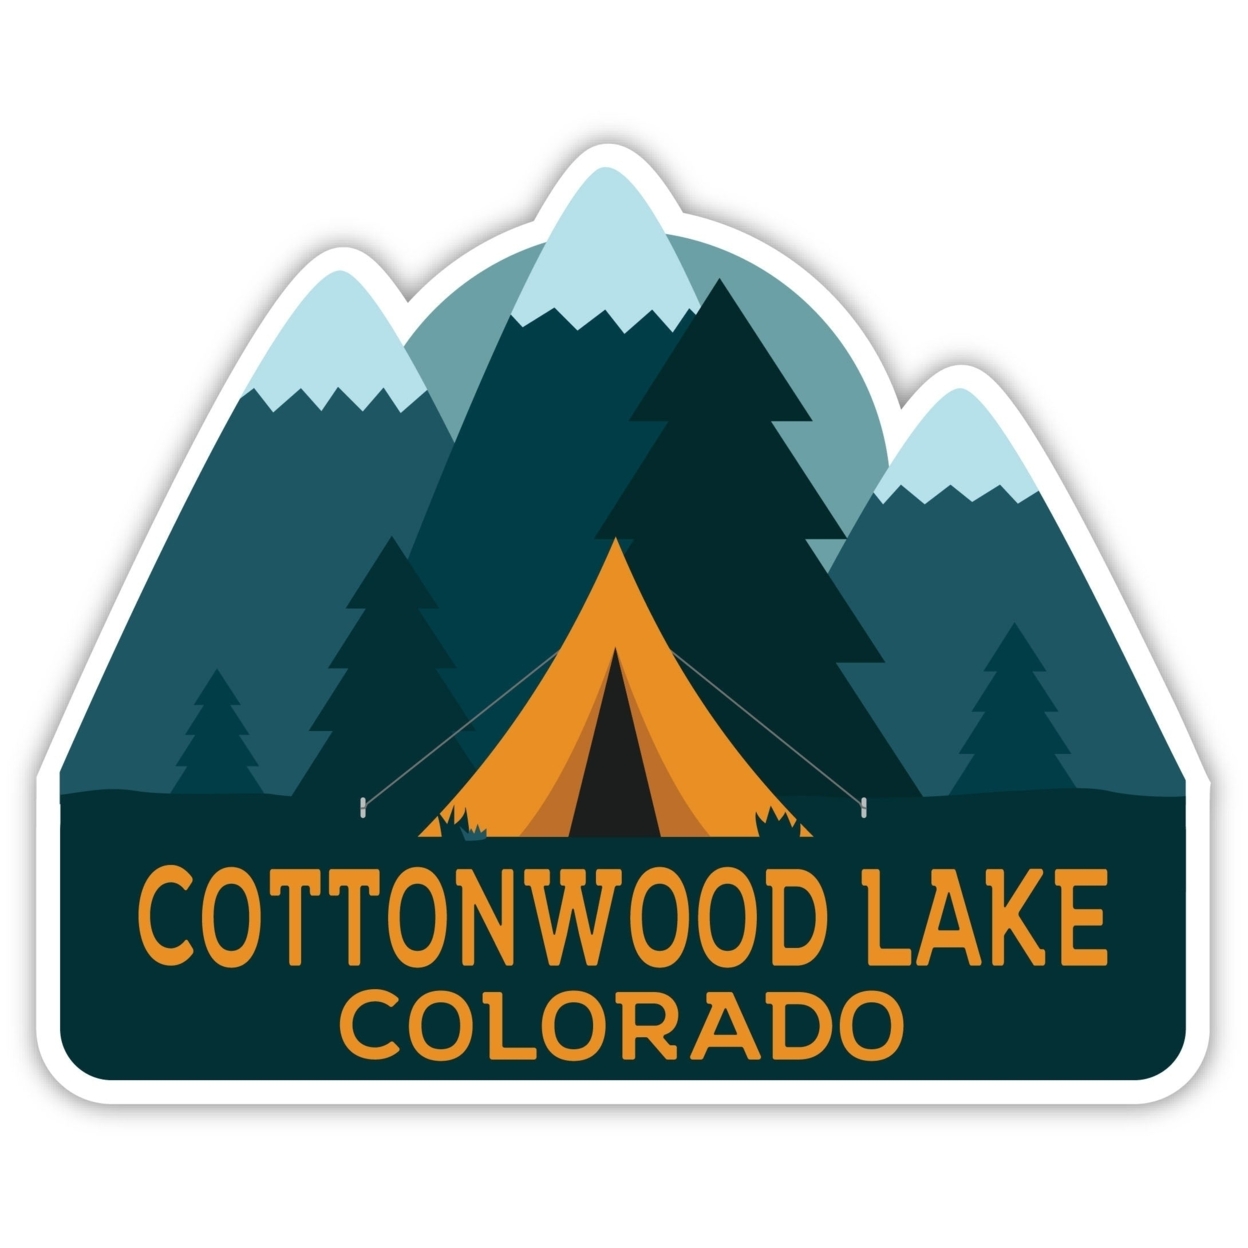 Cottonwood Lake Colorado Souvenir Decorative Stickers (Choose Theme And Size) - 4-Pack, 12-Inch, Tent